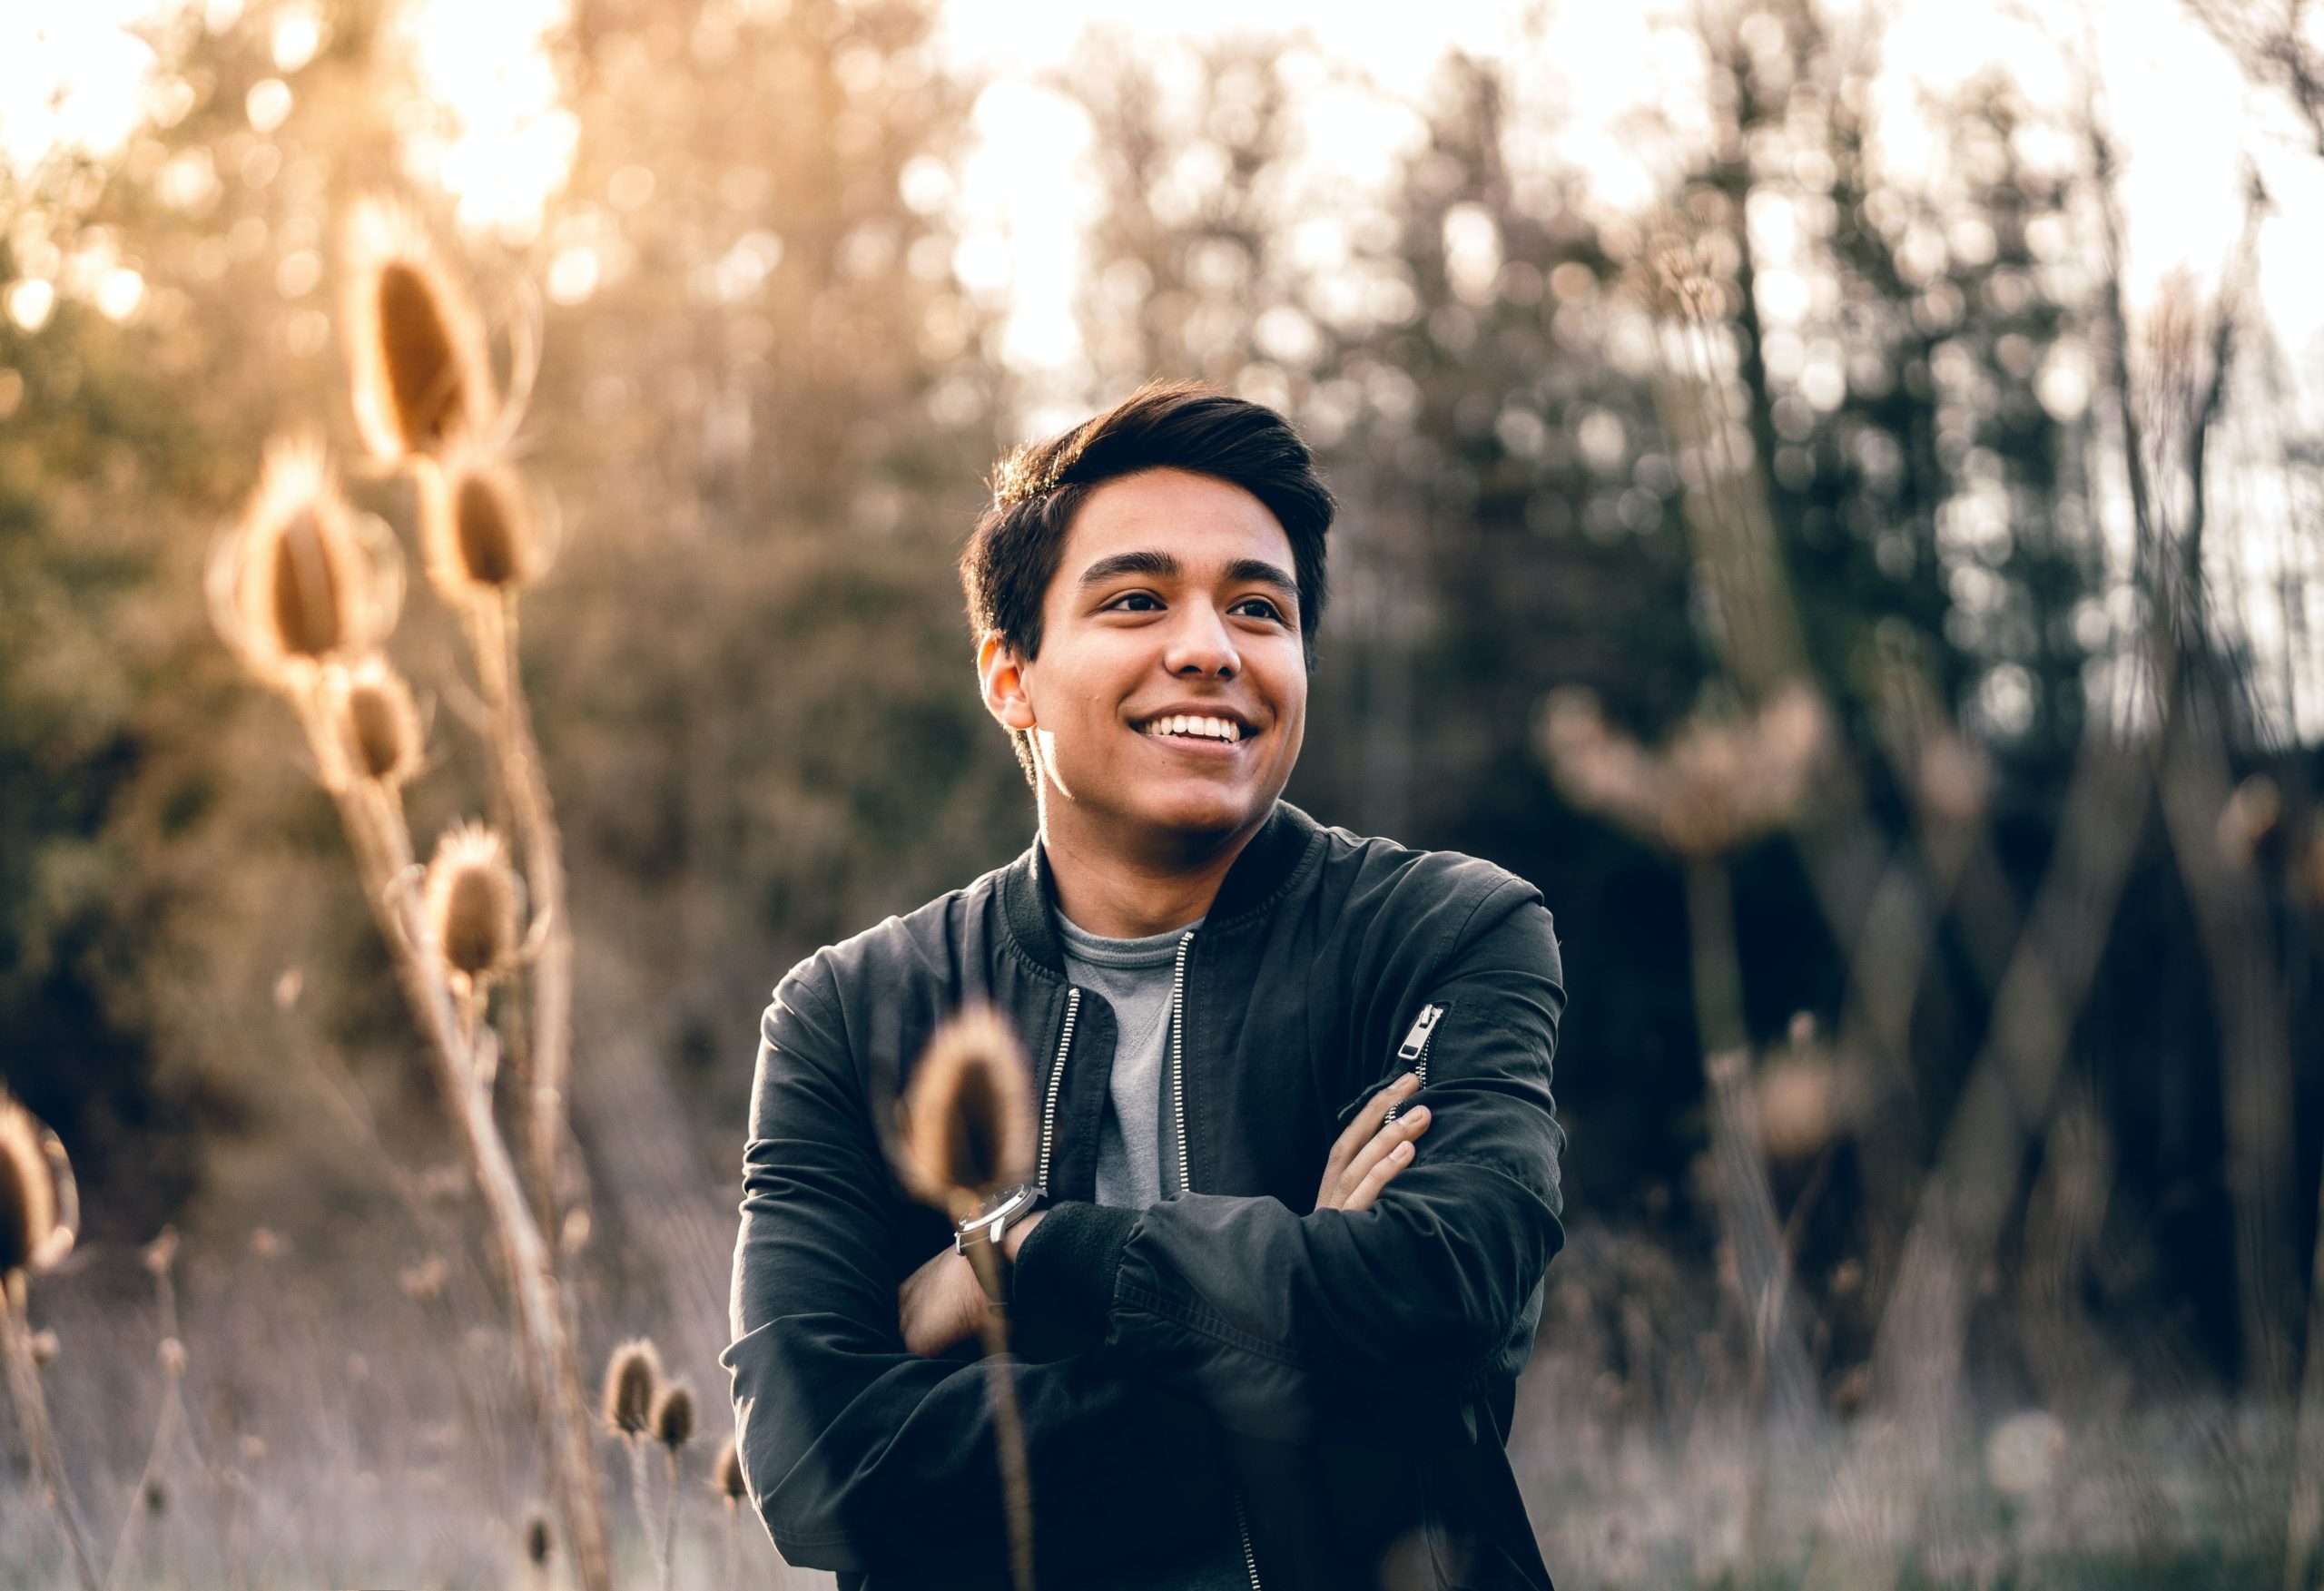 A young man smiling as he stands among some reeds.